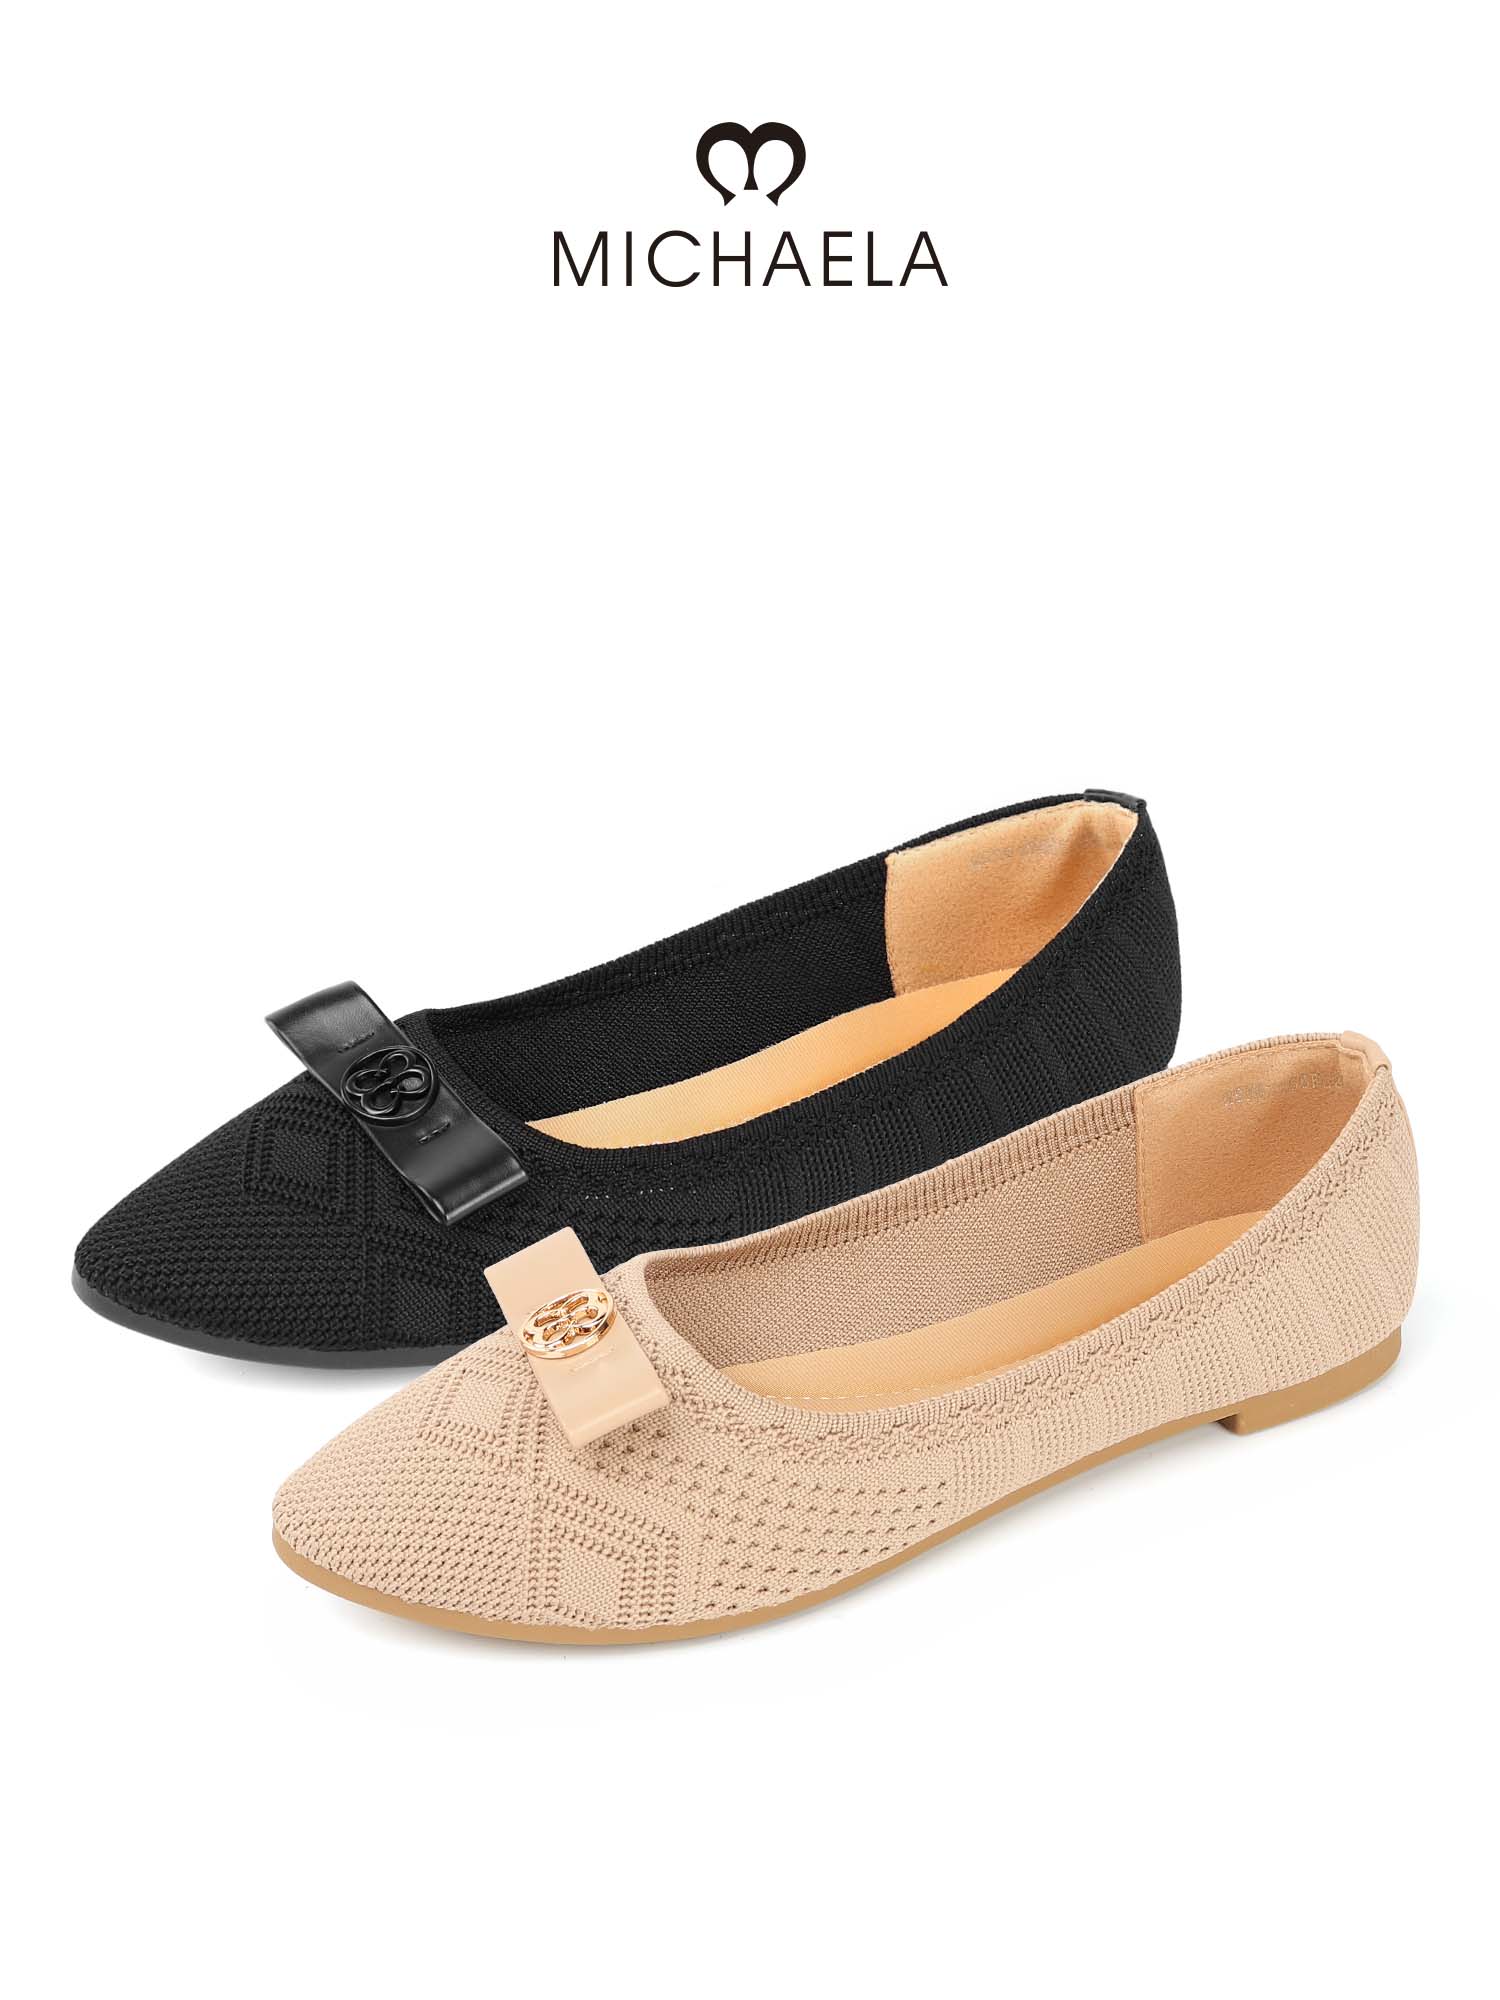 MICHAELA Wedges - Take Your Outfits To The Next Level